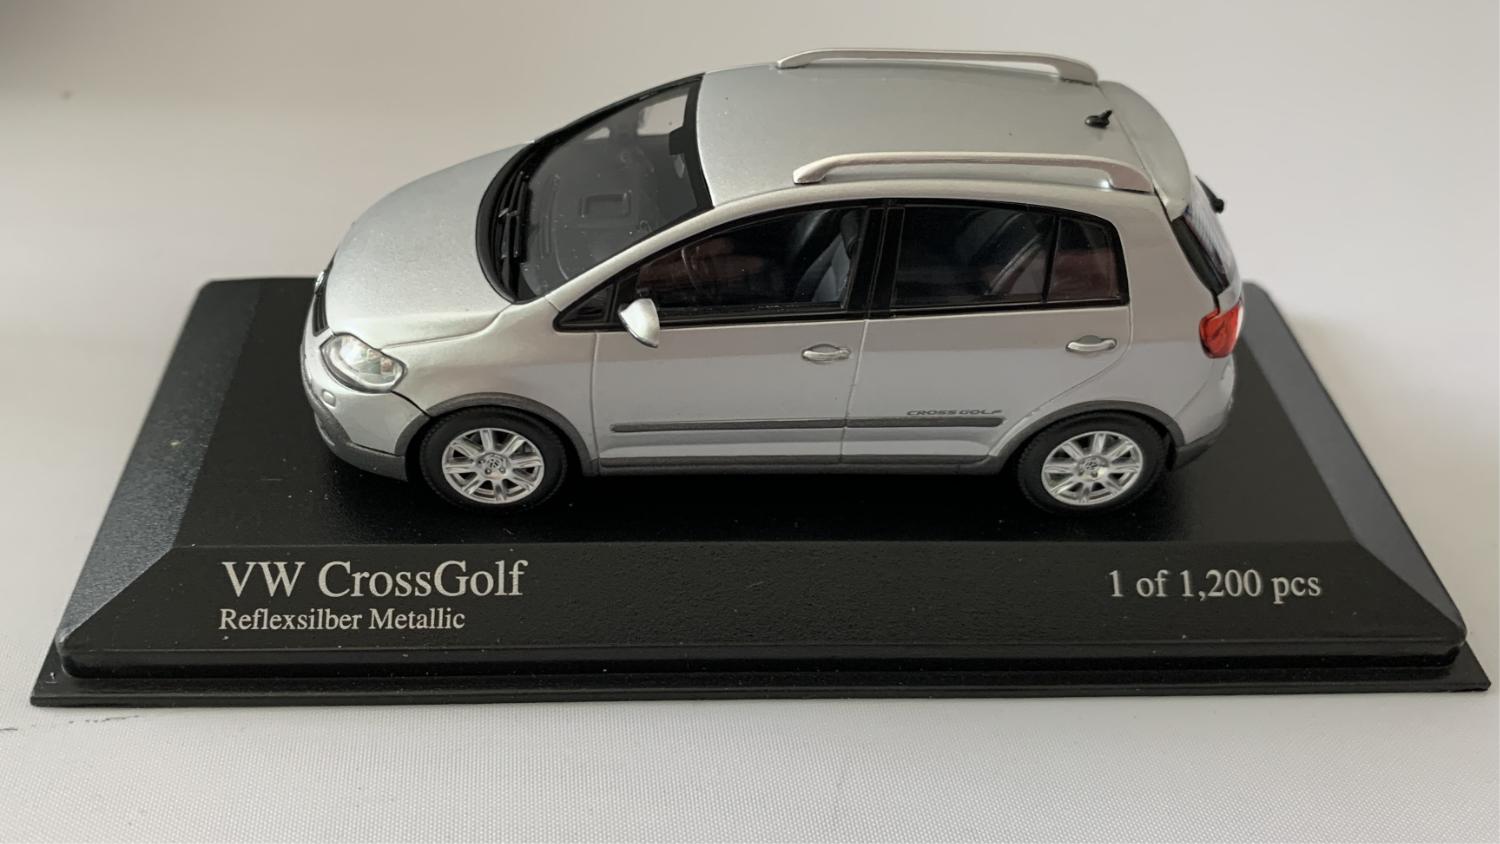 VW Cross Golf 2006 in silver 1:43 scale Minichamps limited edition model, clearance offers